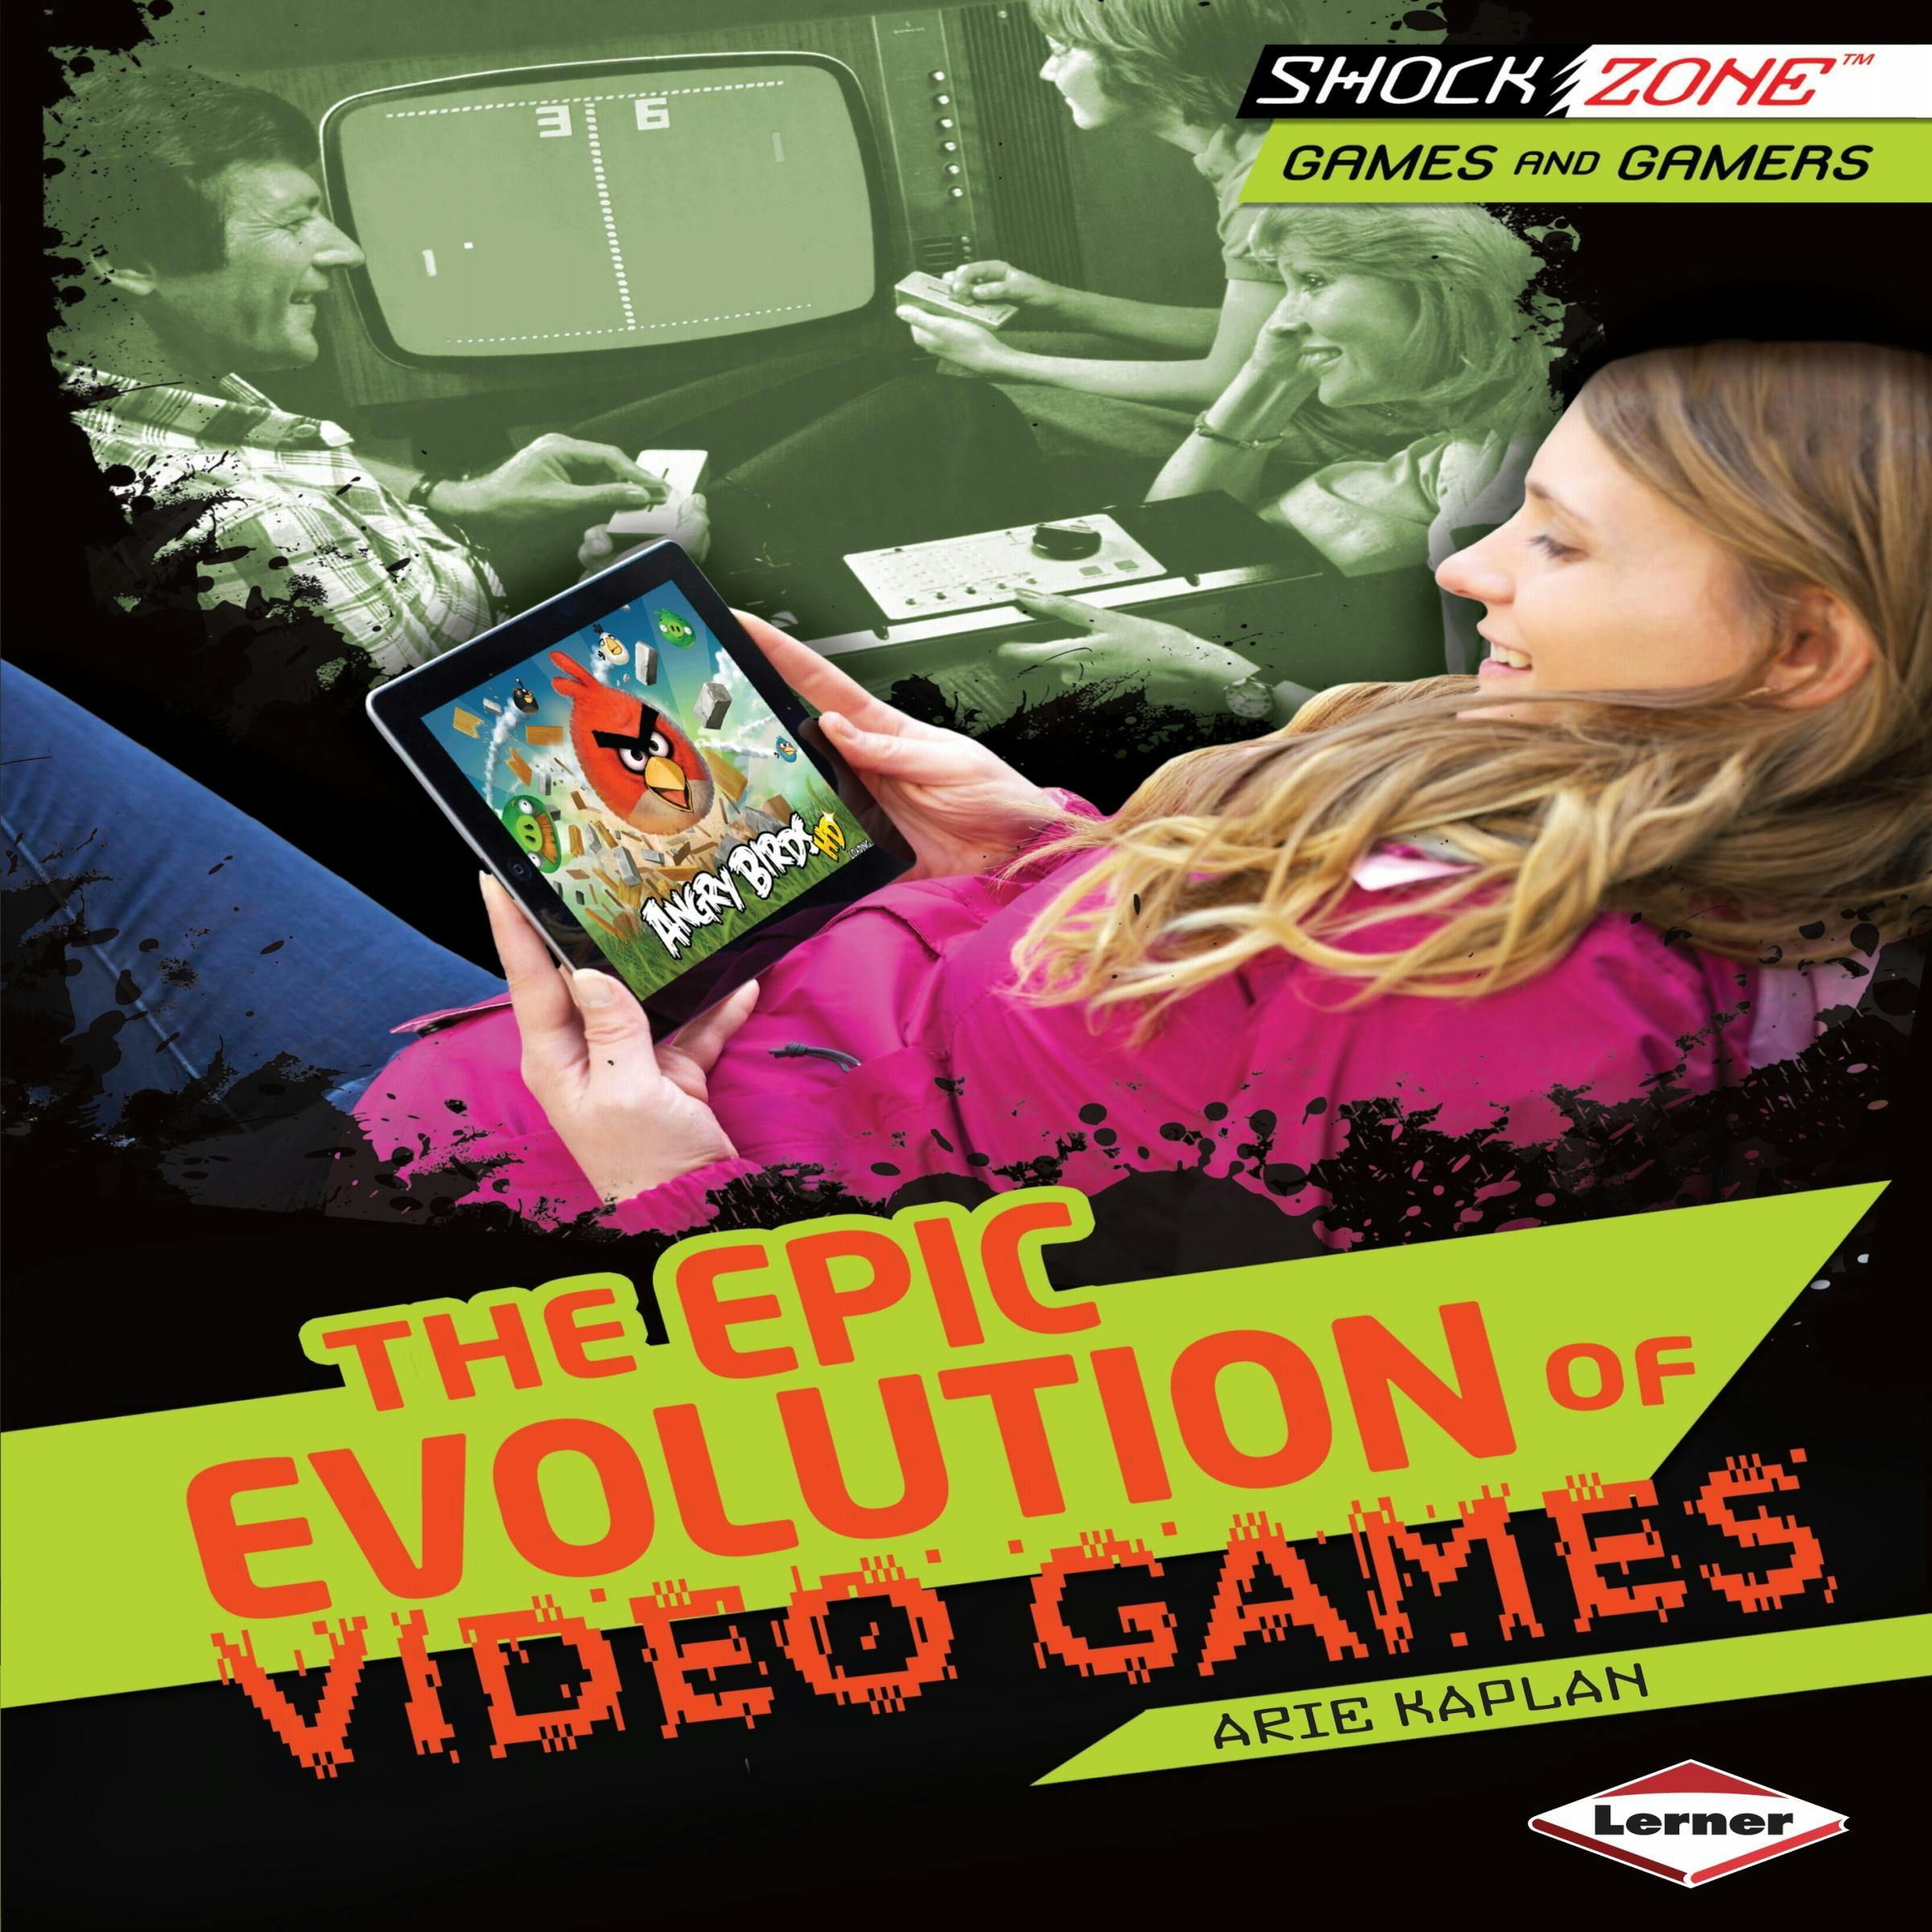 The Epic Evolution of Video Games - Arie Kaplan